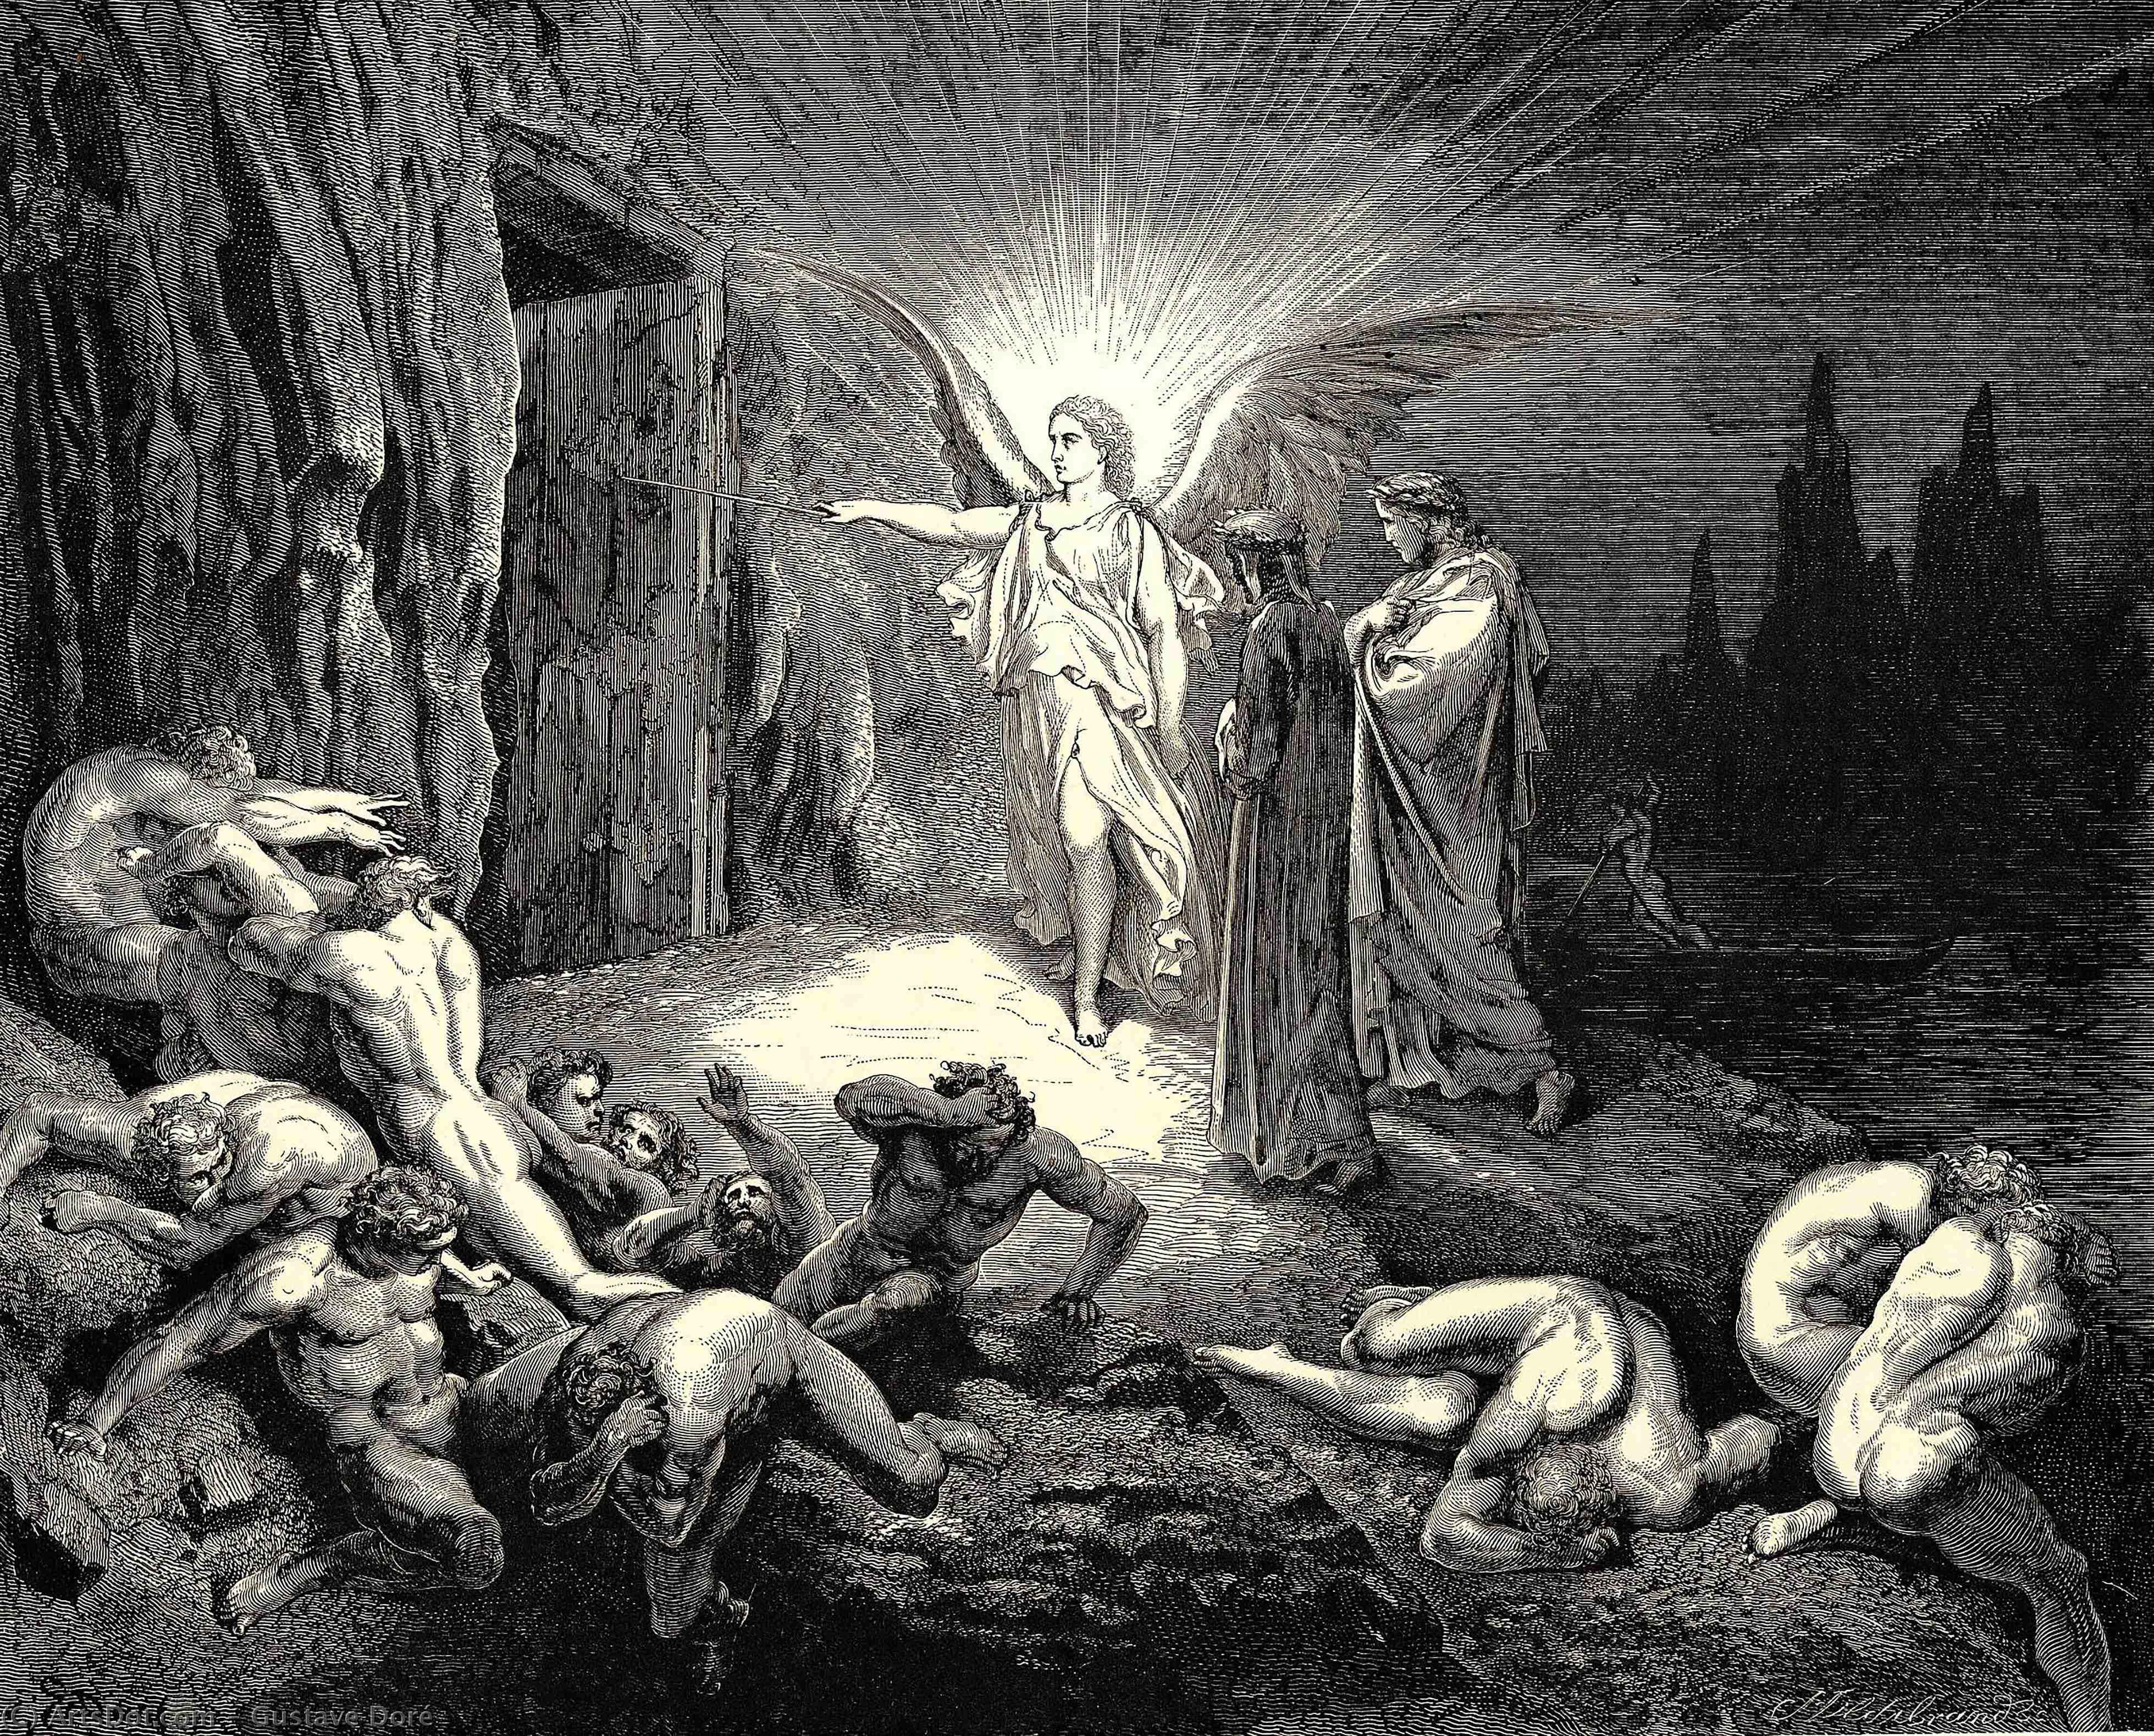 Wikioo.org - Bách khoa toàn thư về mỹ thuật - Vẽ tranh, Tác phẩm nghệ thuật Paul Gustave Doré - The Inferno, Canto 9, lines 87-89. To the gate He came, and with his wand touch’d it, whereat Open without impediment it flew.